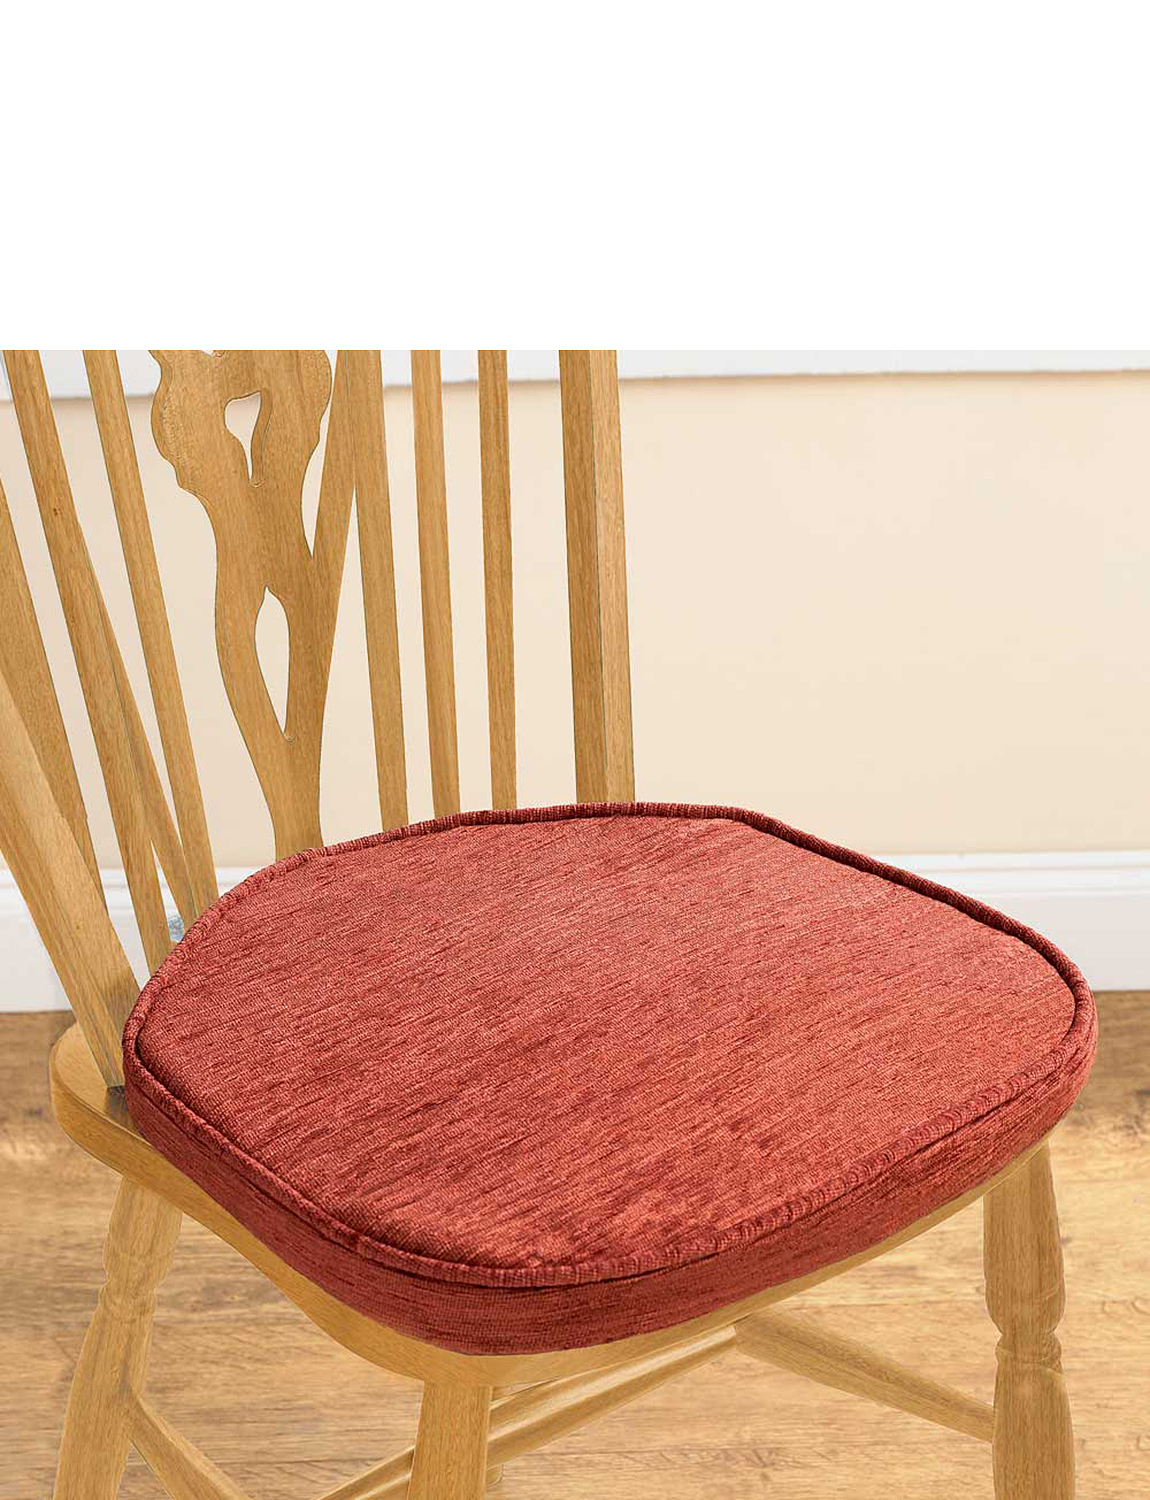 Dining Chair Seat Pads Australia Seat Cushion Covers For Chairs